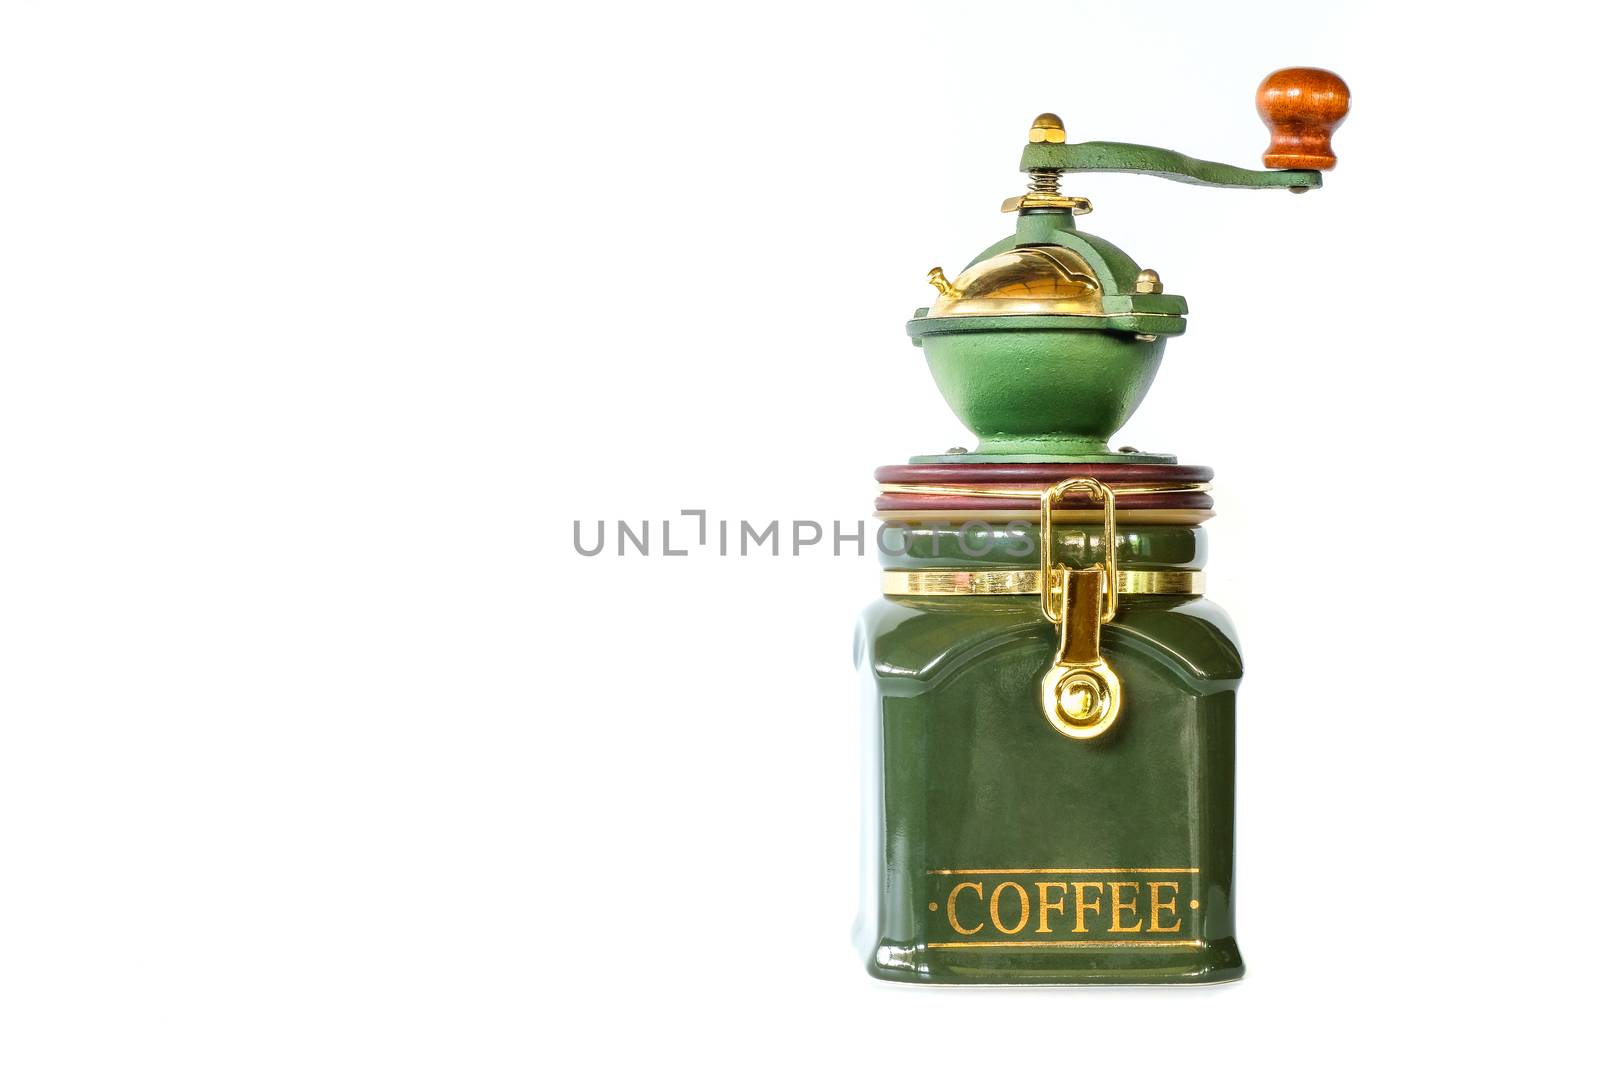 a vintage coffee grinder with green ceramic container and green metal bowel